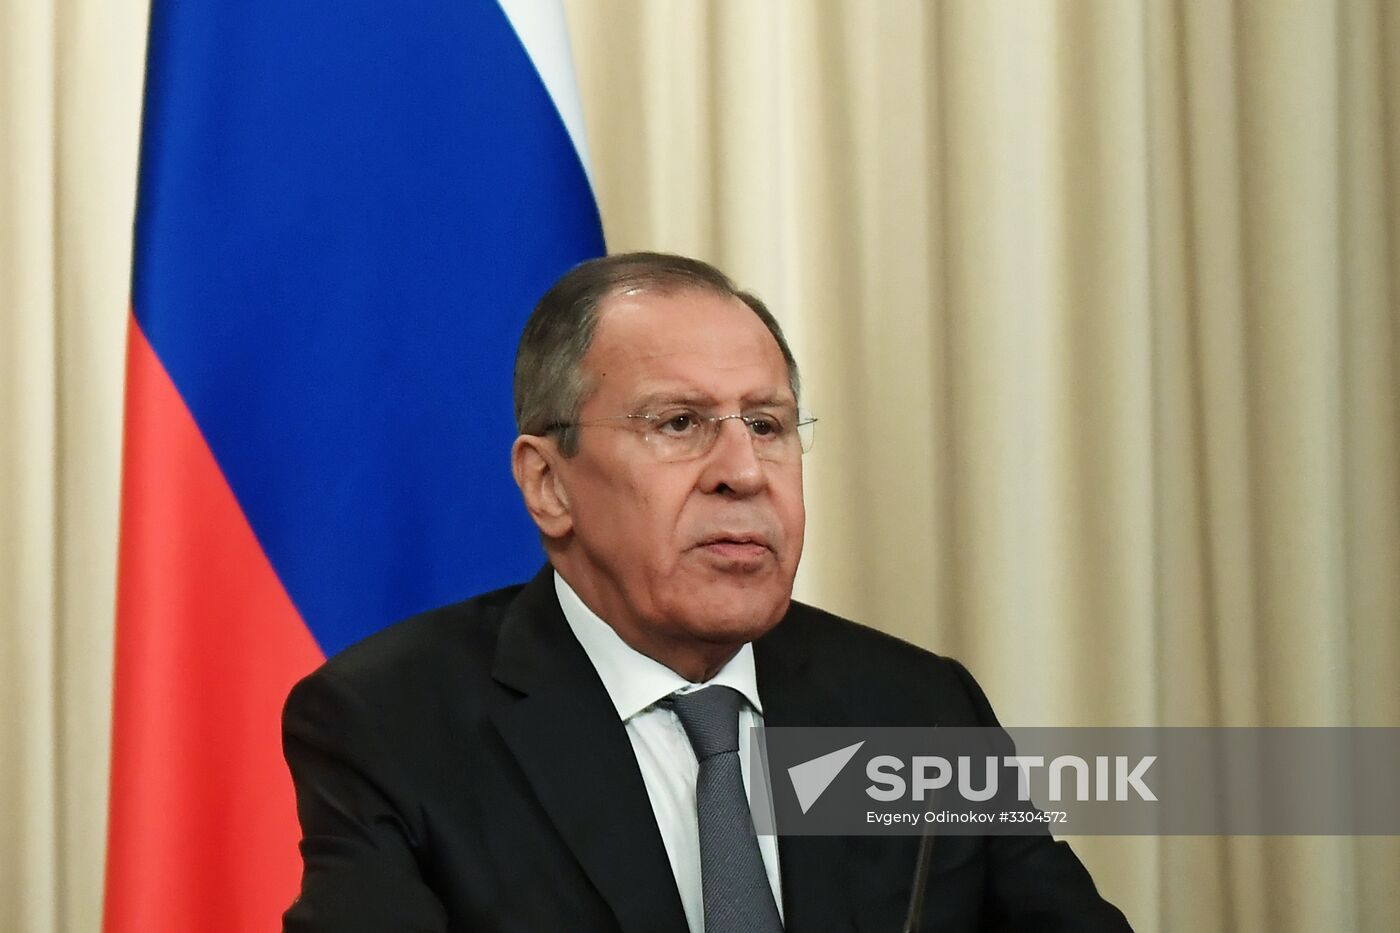 Russian Foreign Minister Sergei Lavrov meets with Foreign Minister of Pakistan Khawaja Muhammad Asif